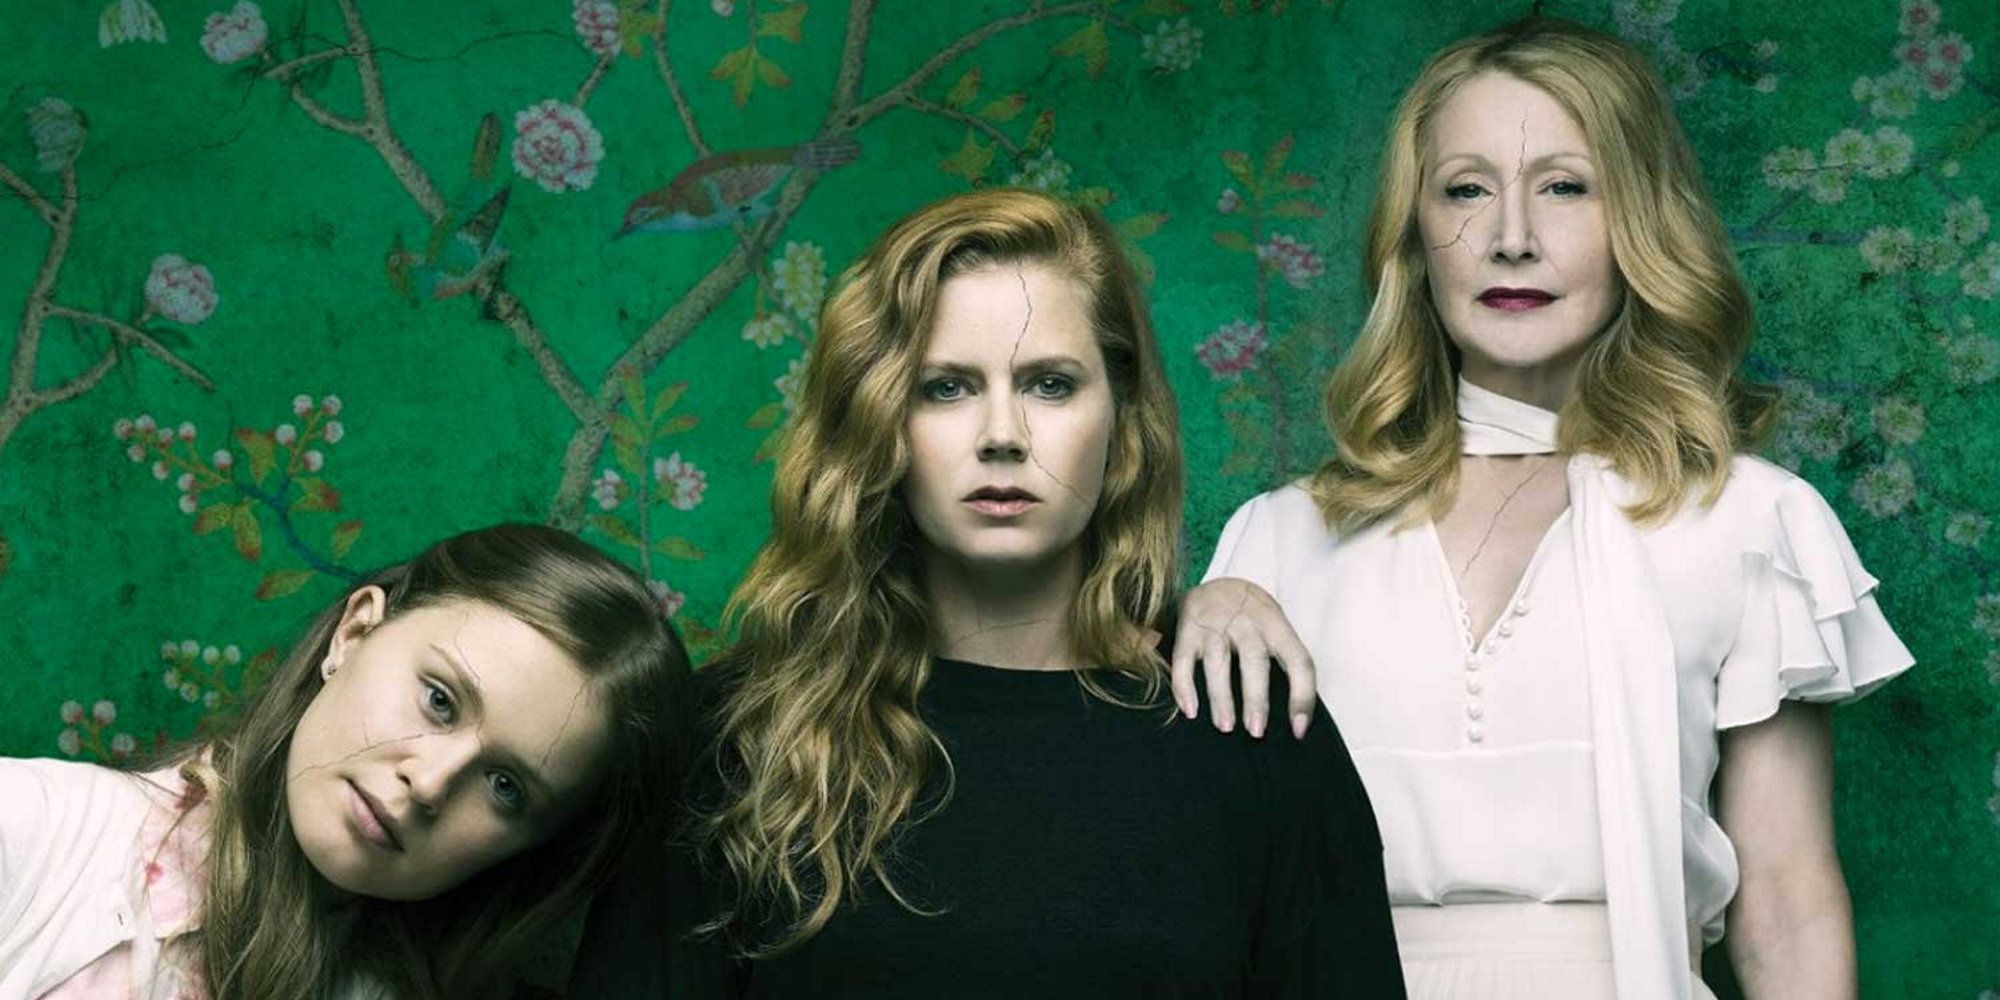 Promotional image featuring Eliza Scanlen as Amma, Amy Adams as Camille, and Patricia Clarkson as Adora